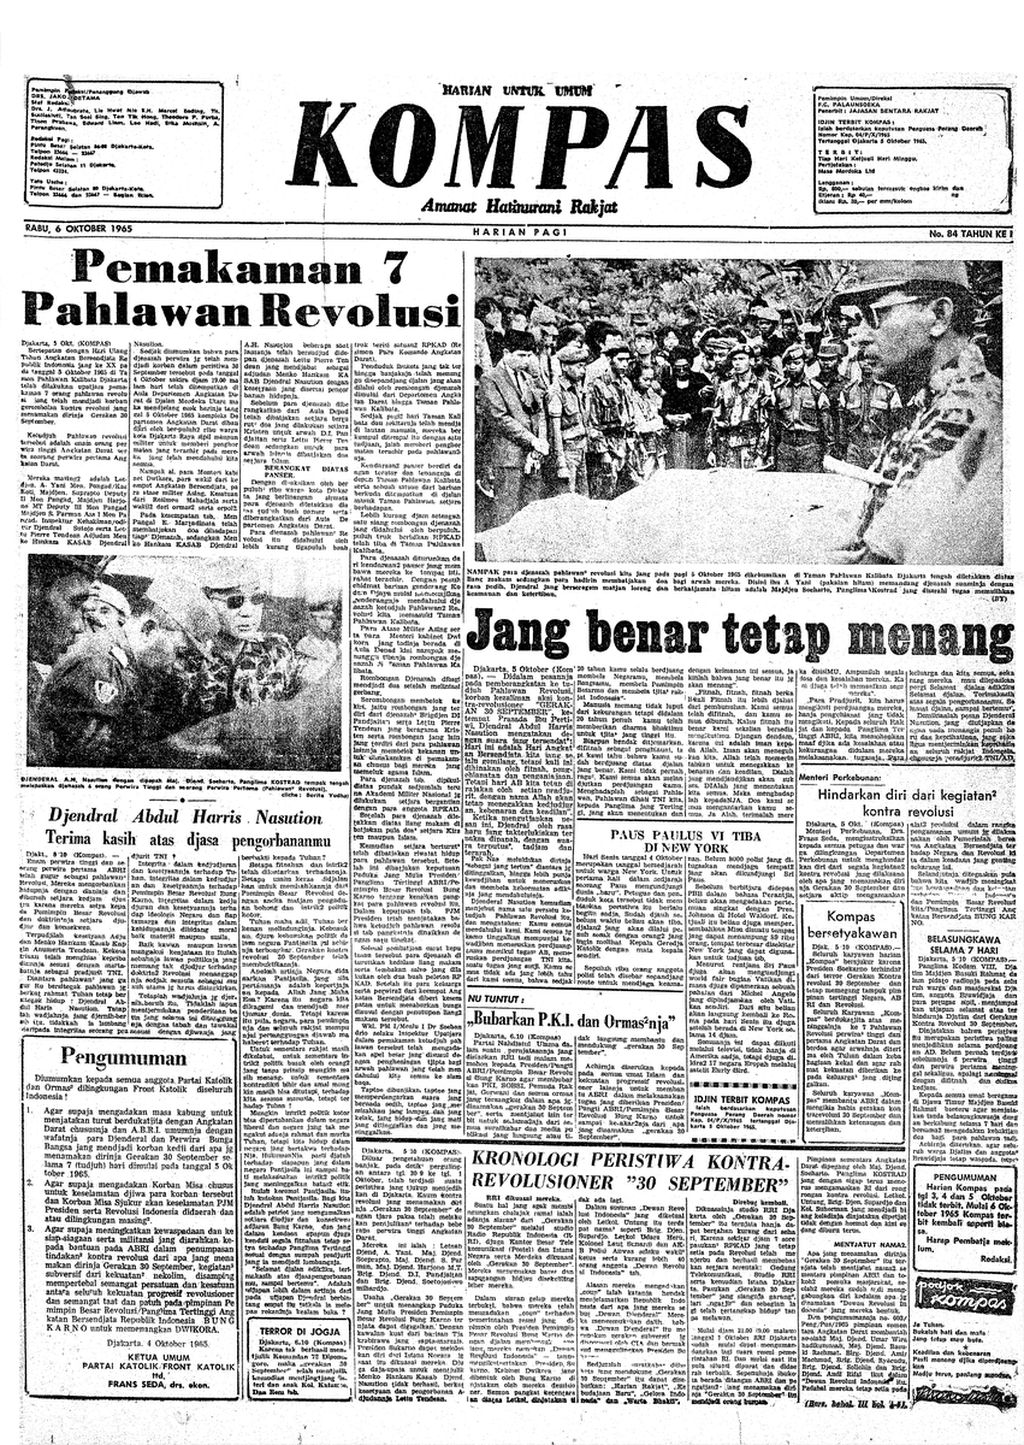 Kompas Daily news archive related to the events of the 30 September 1965 Movement under the title "Funeral of the 7 Heroes of the Revolution" which was published in the Wednesday, 6 October 1965 edition of Kompas Daily..